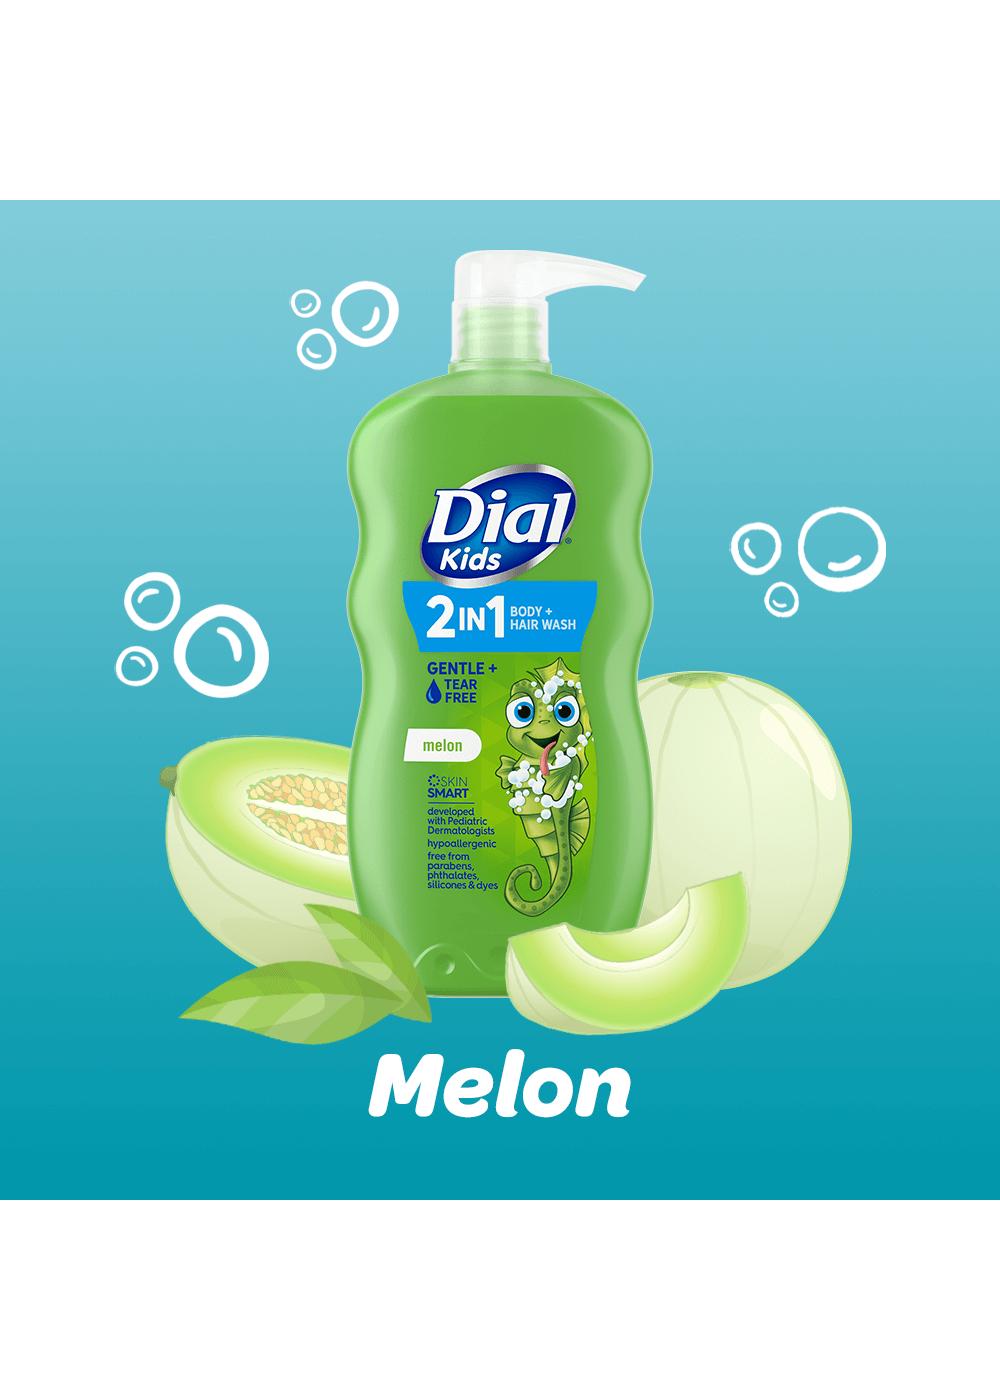 Dial Kids 2-in-1 Body + Hair Wash - Melon; image 2 of 9